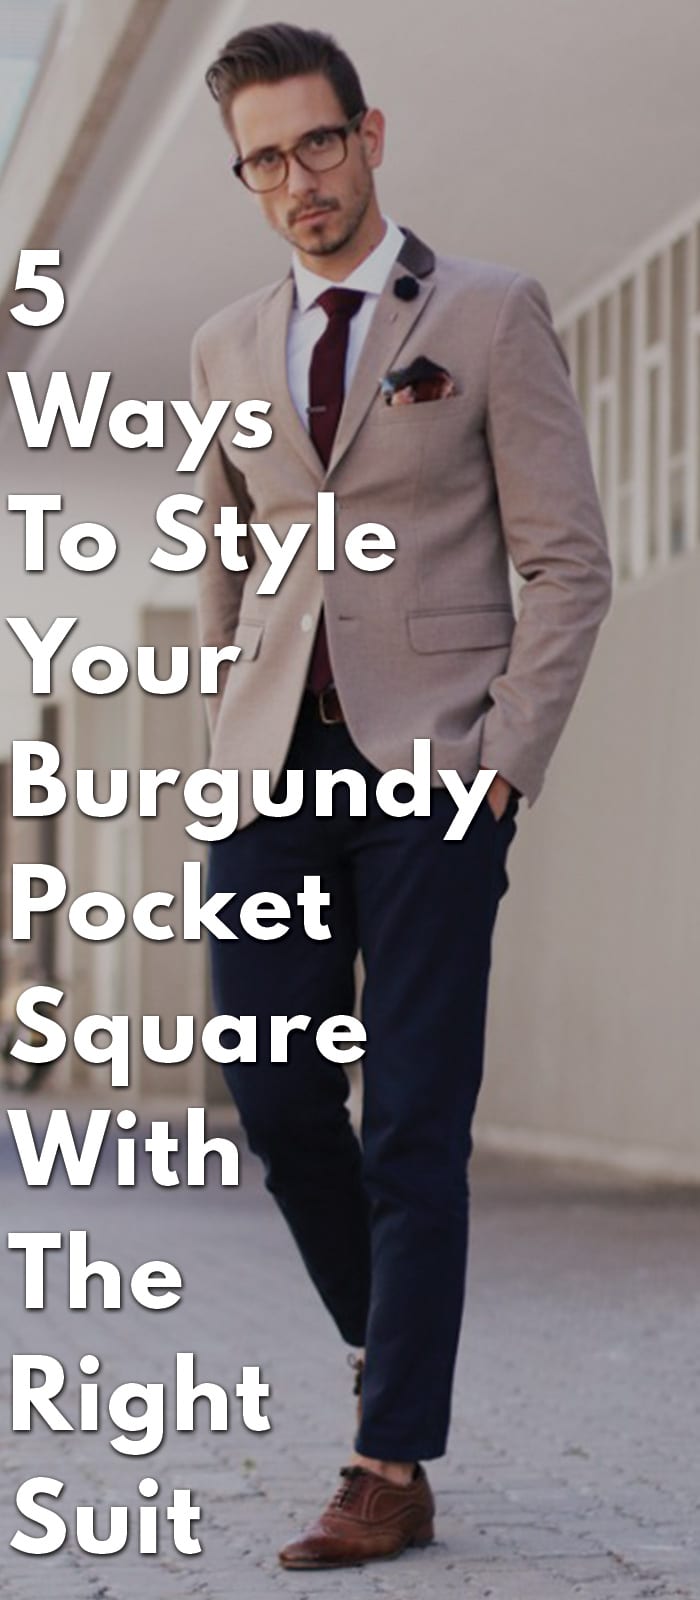 5-Ways-To-Style-Your-Burgundy-Pocket-Square-With-The-Right-Suit